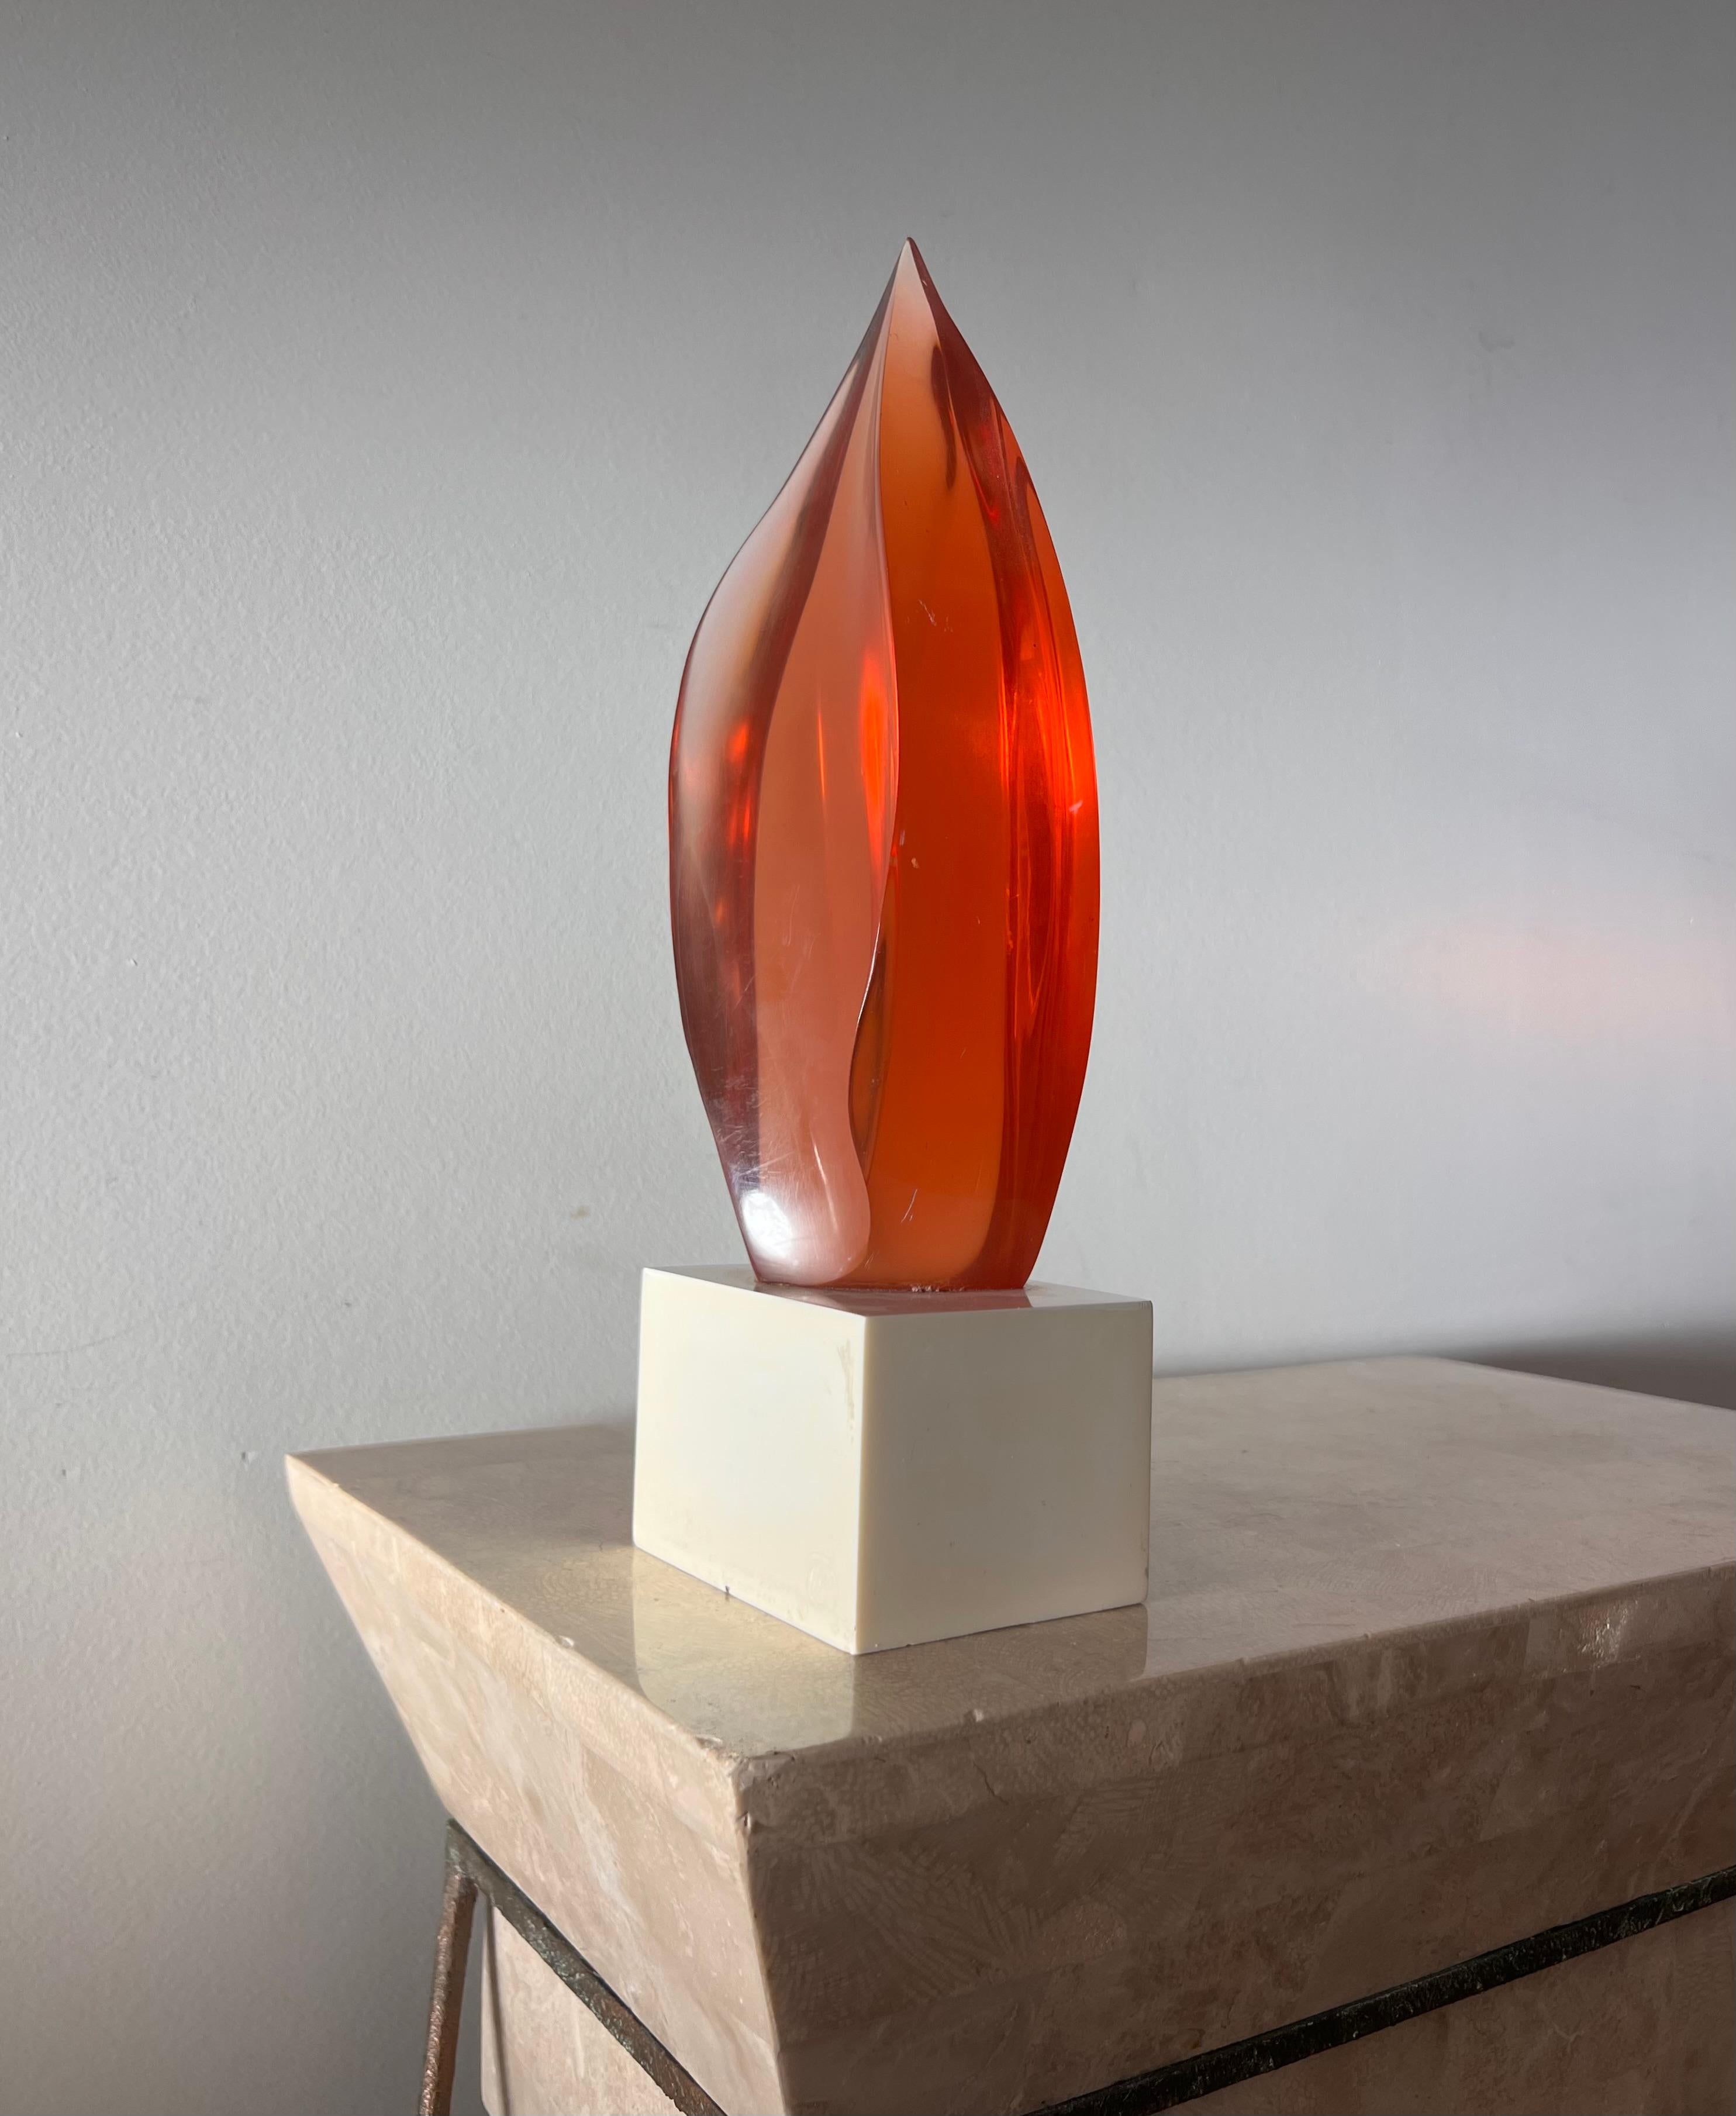 A vintage postmodern lucite sculpture of a fire’s flame, mounted on plinth, 1983. One side of the plinth has been engraved with a dedication to “Dr. Bob” - please see the photos. The flame itself is brilliant iridescent coral orange hue which casts